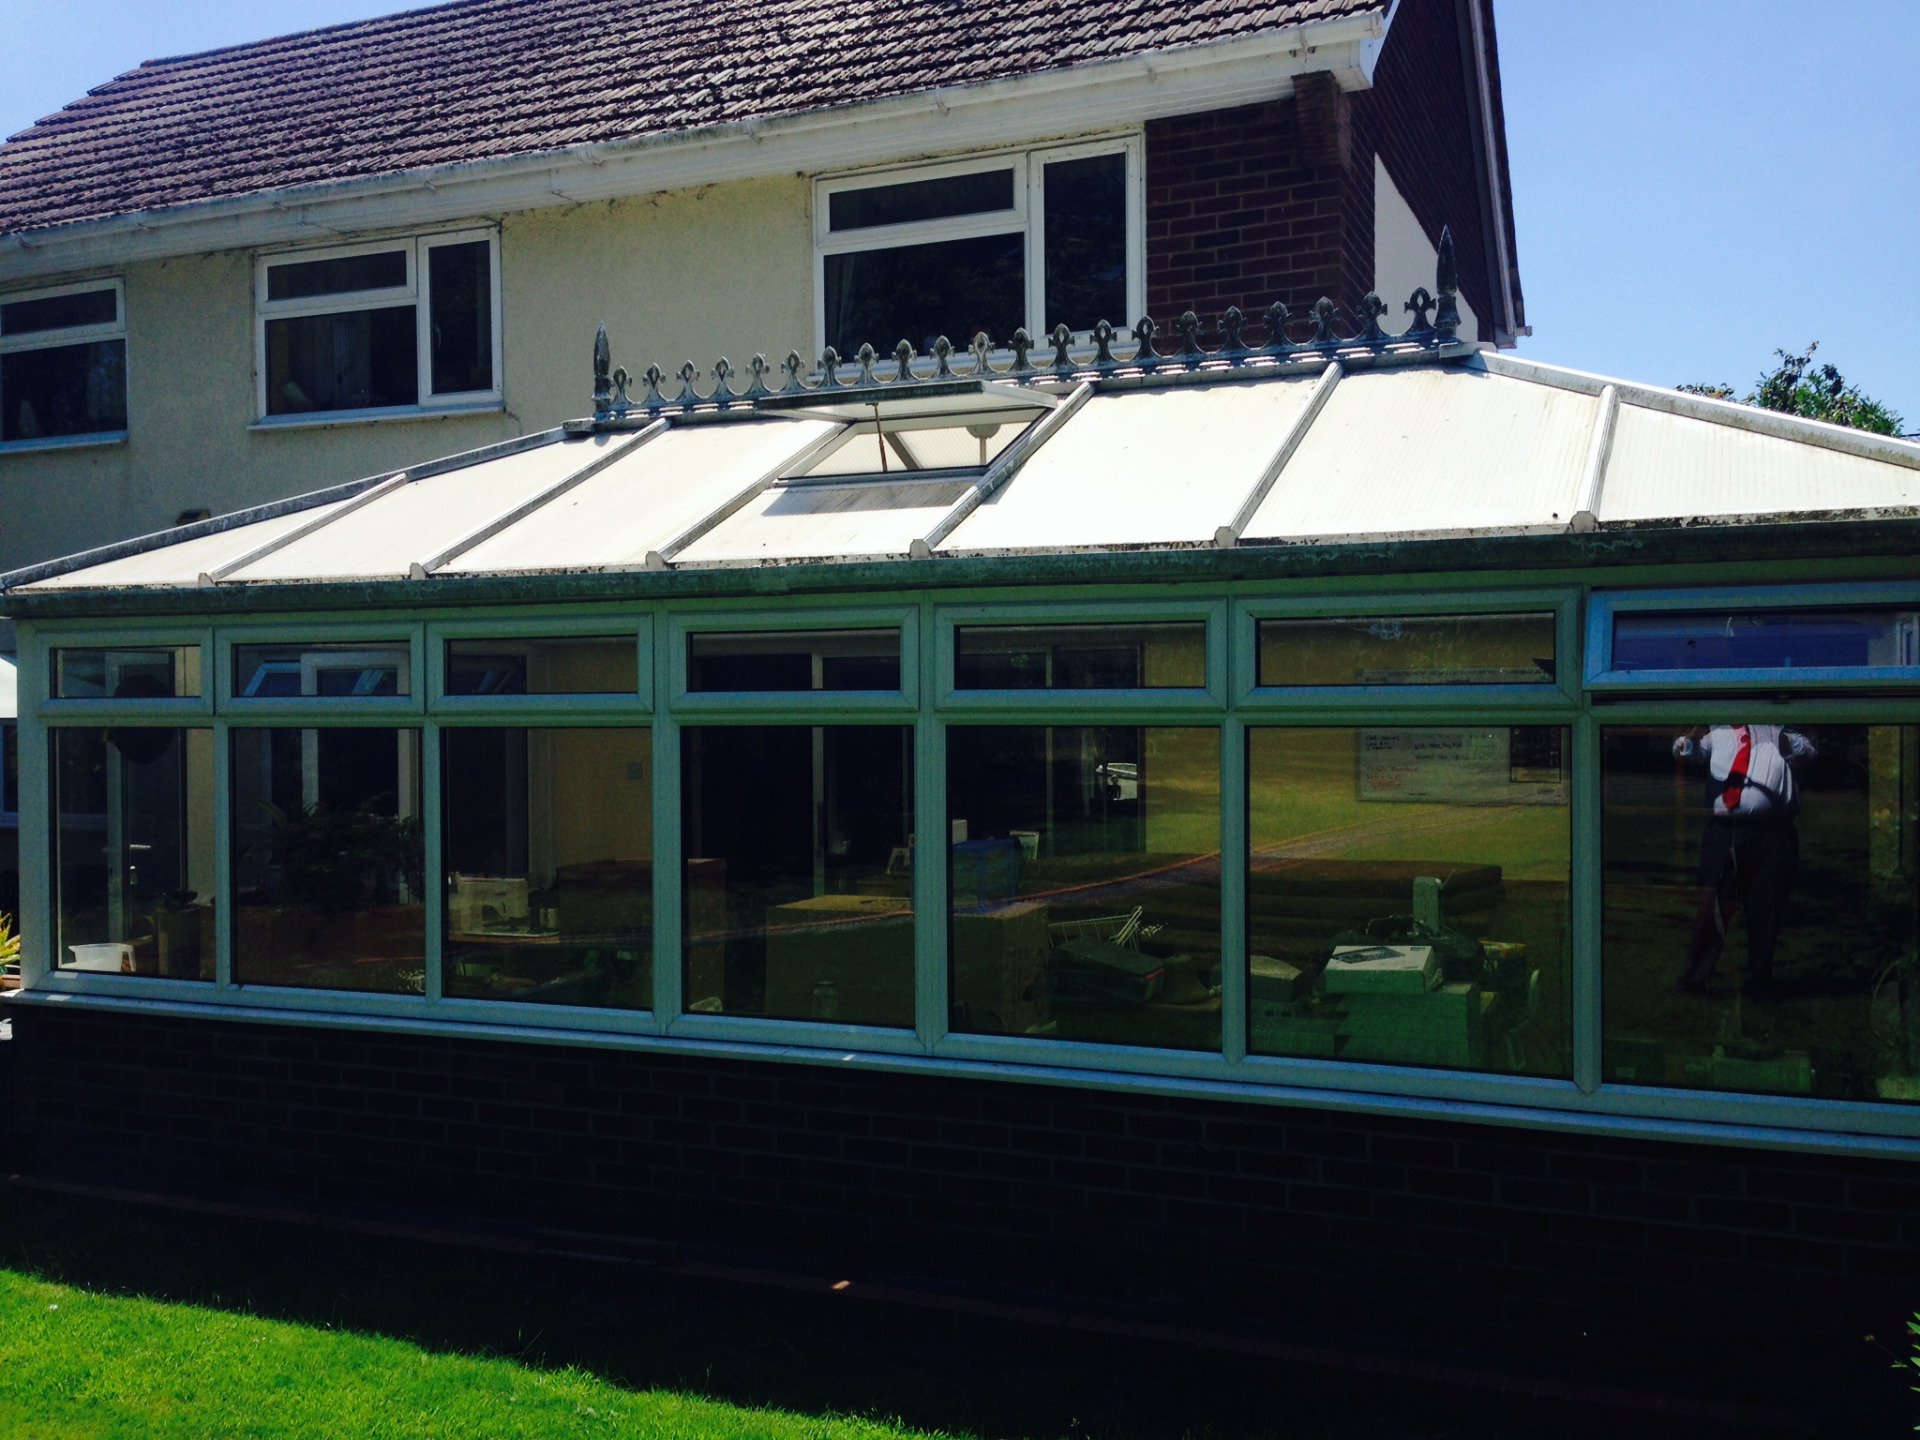 Equinox Tiled Roof System